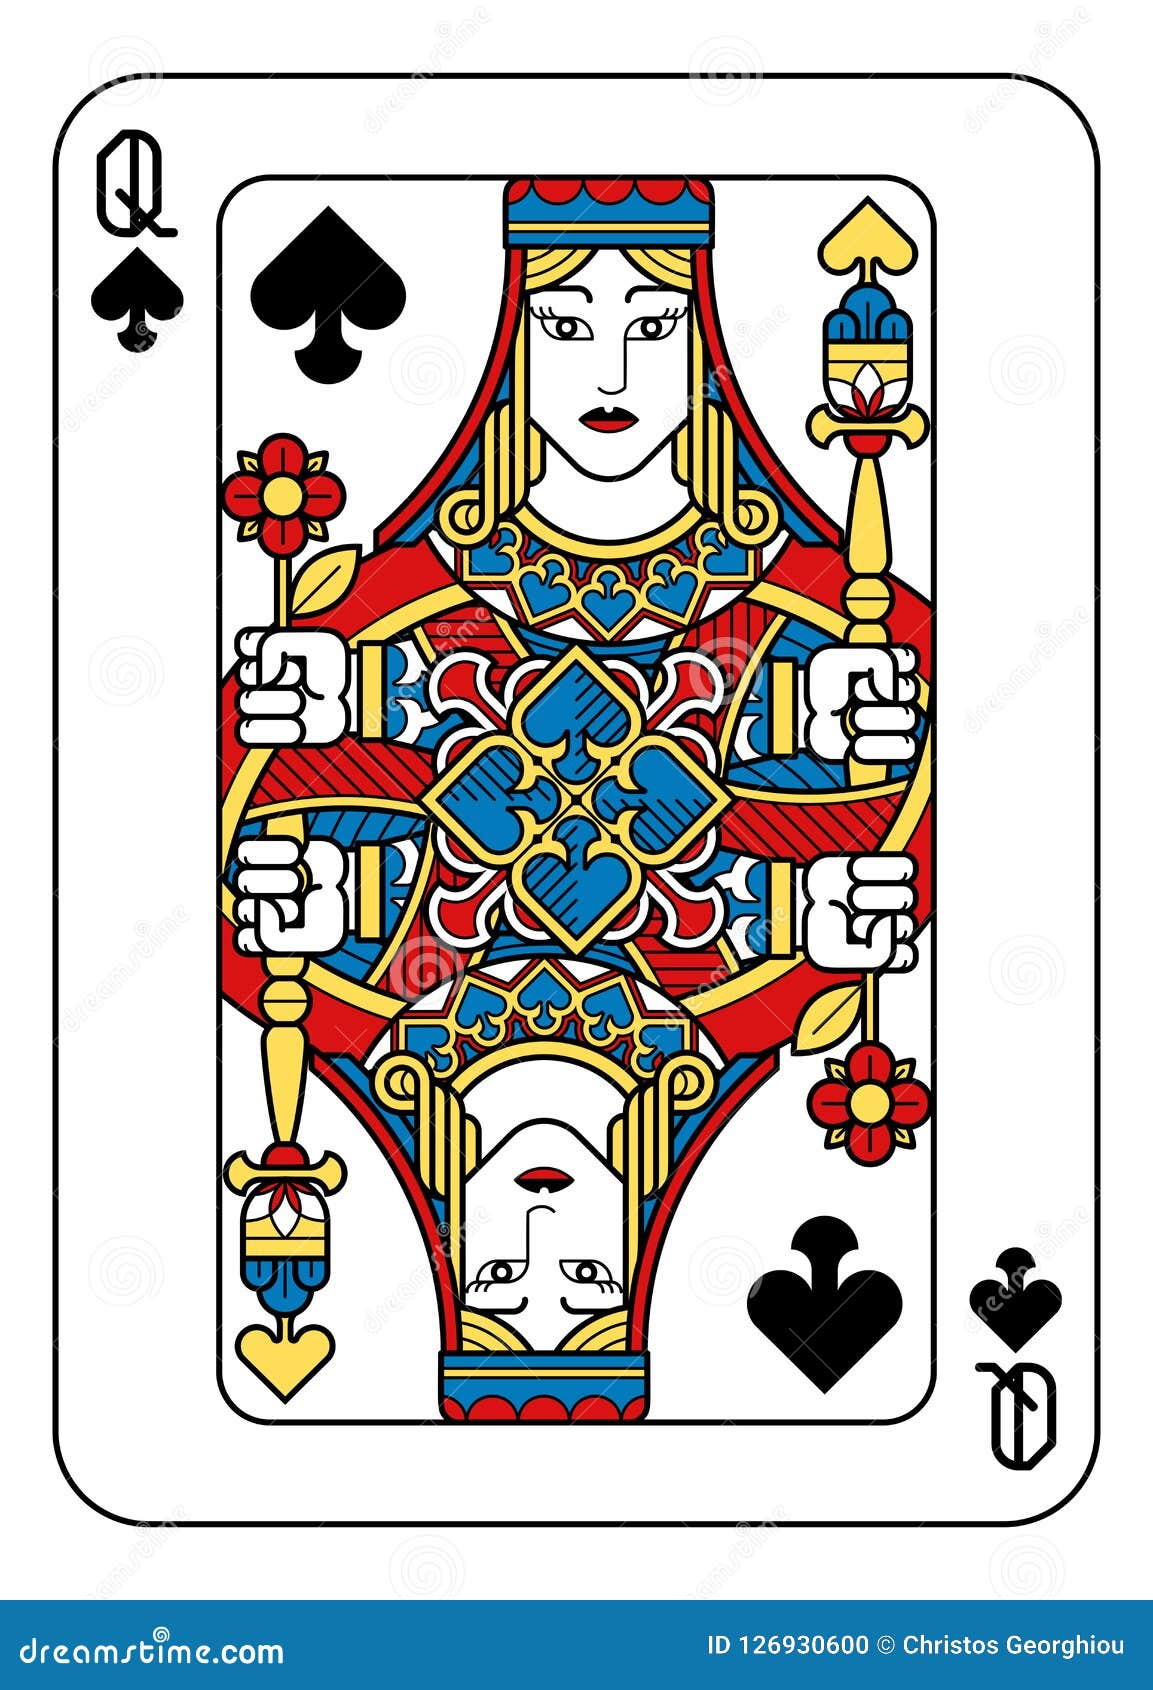 Original How Many Red Spades Are In A Deck Of Cards - pixaby